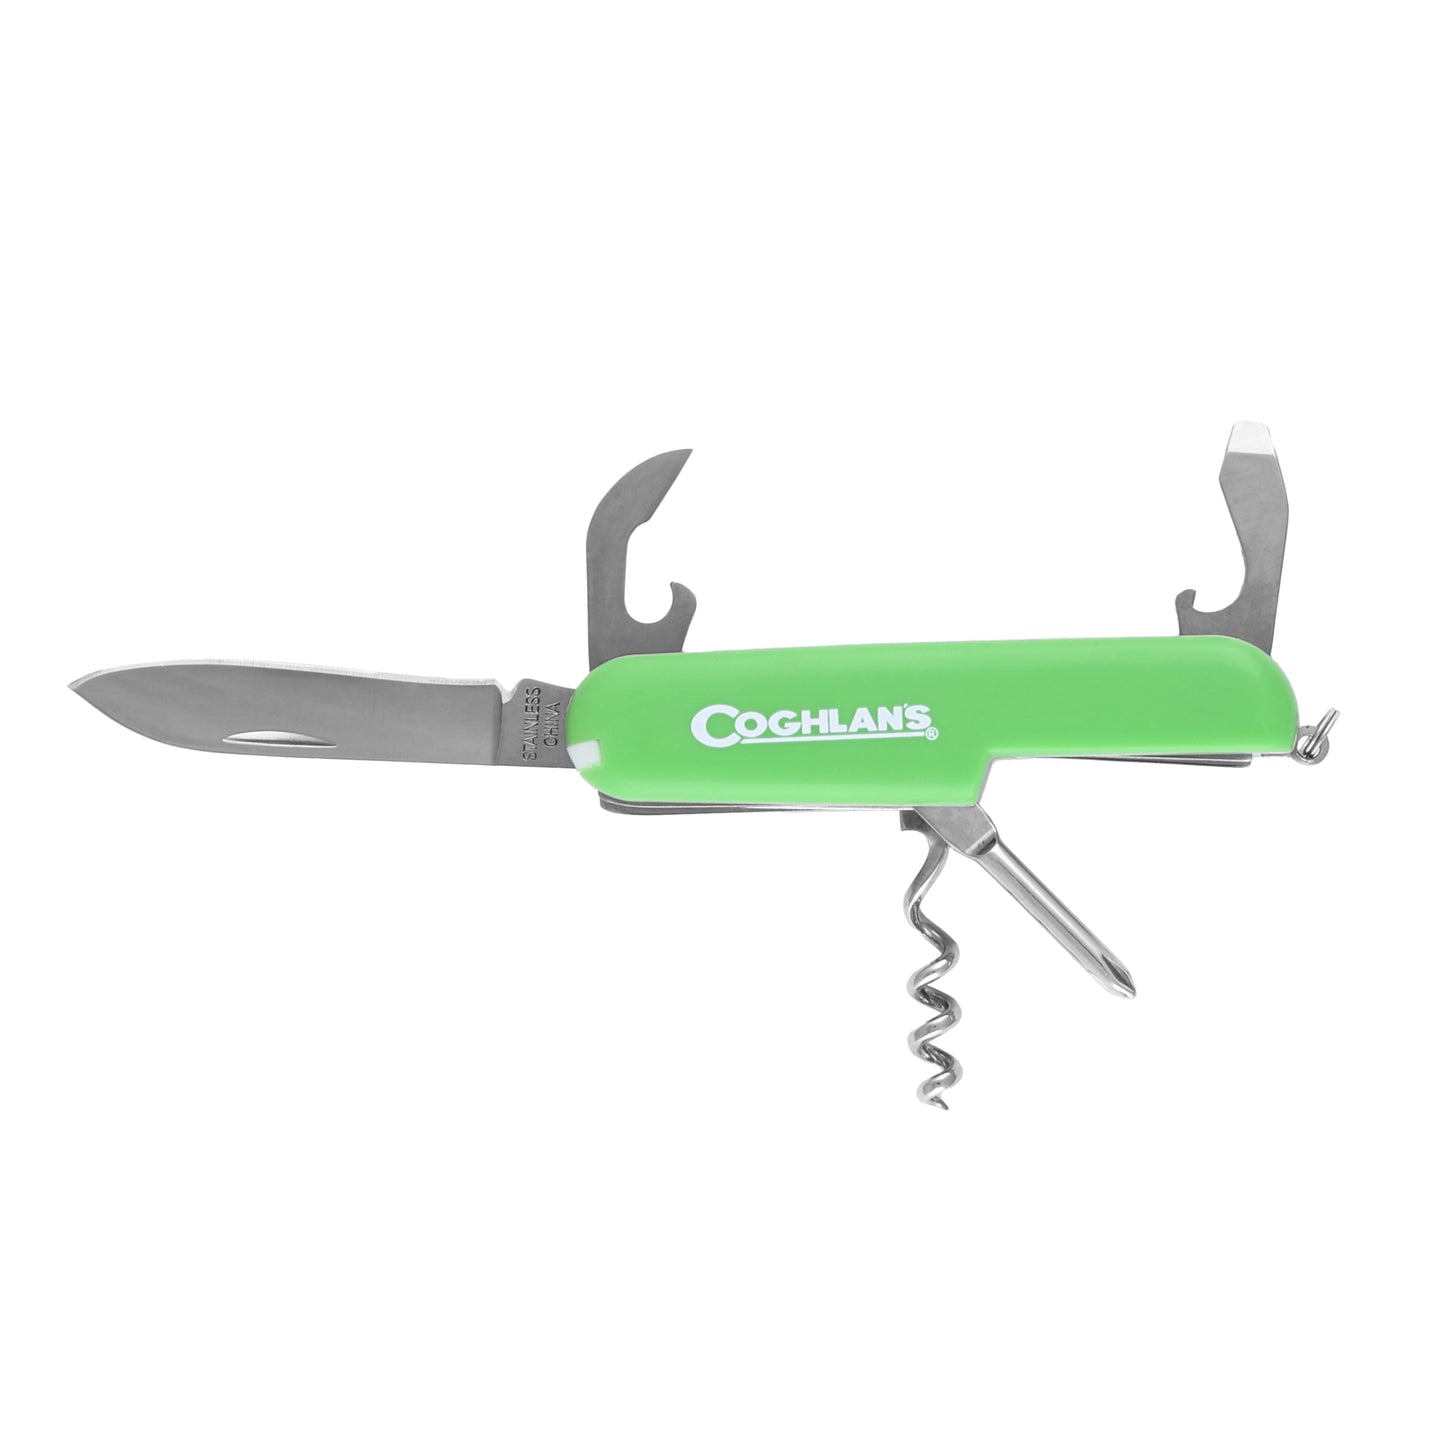 Camp Knife - 5 Function